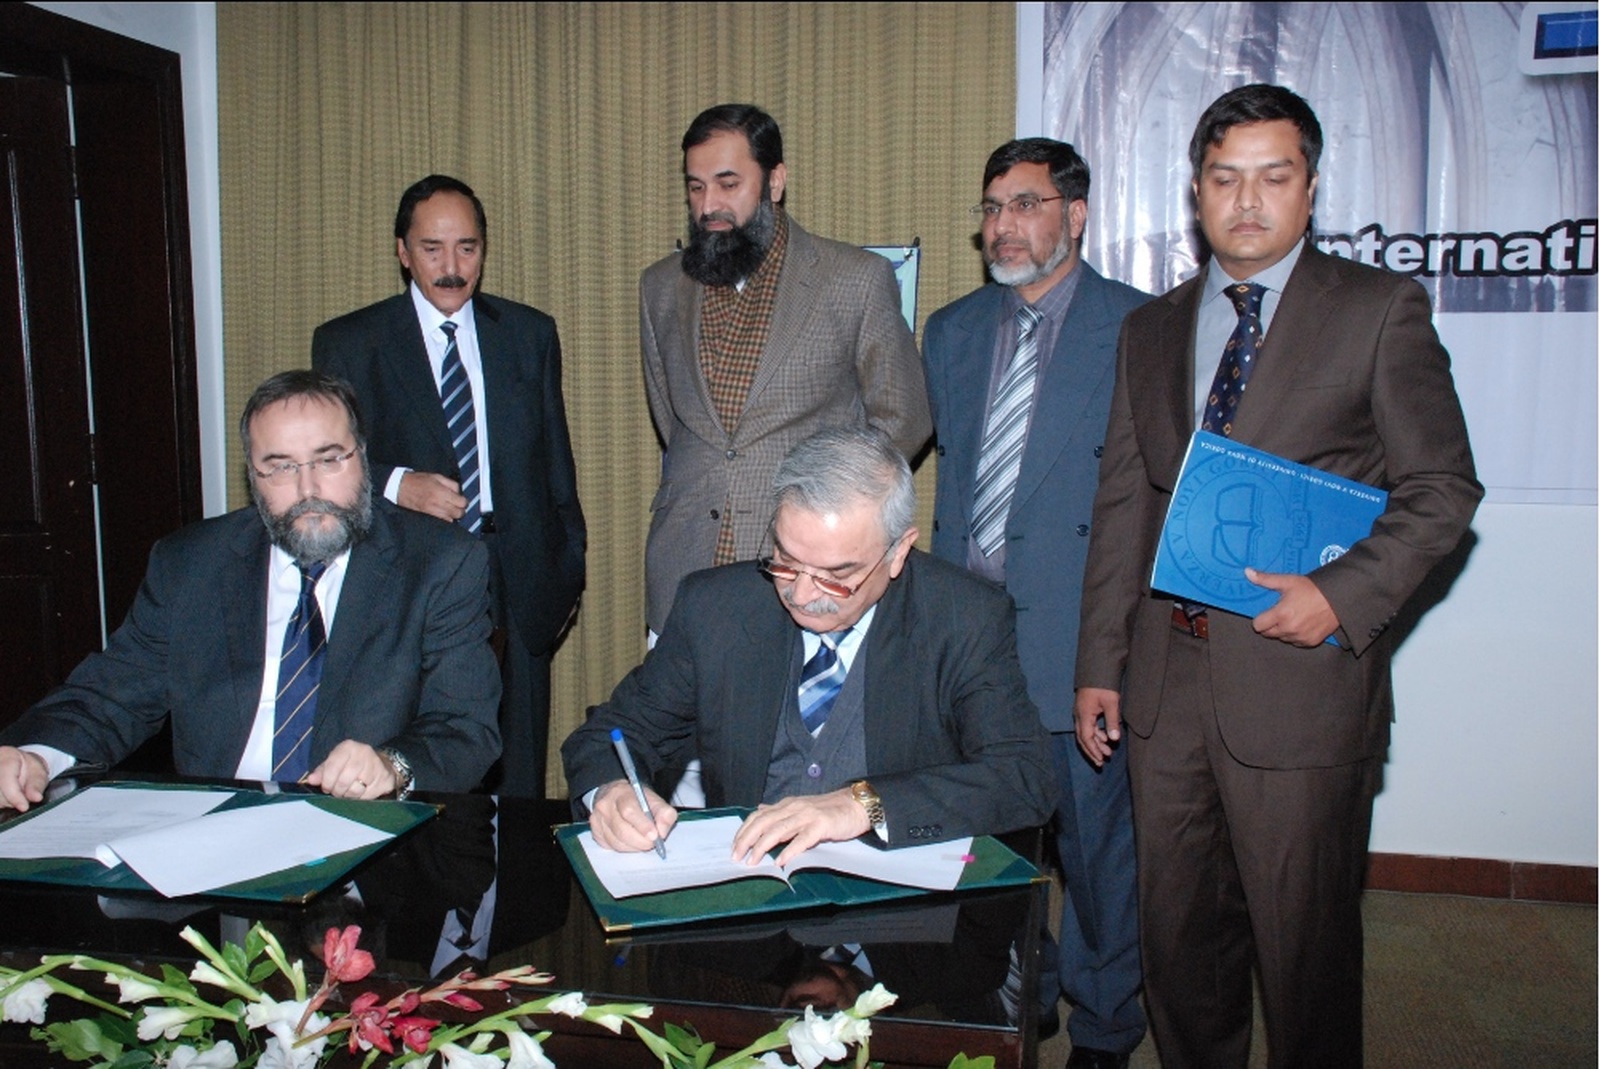 Signing of the Agreement on Collaboration between the University of Nova Gorica and Air University from Islamabad